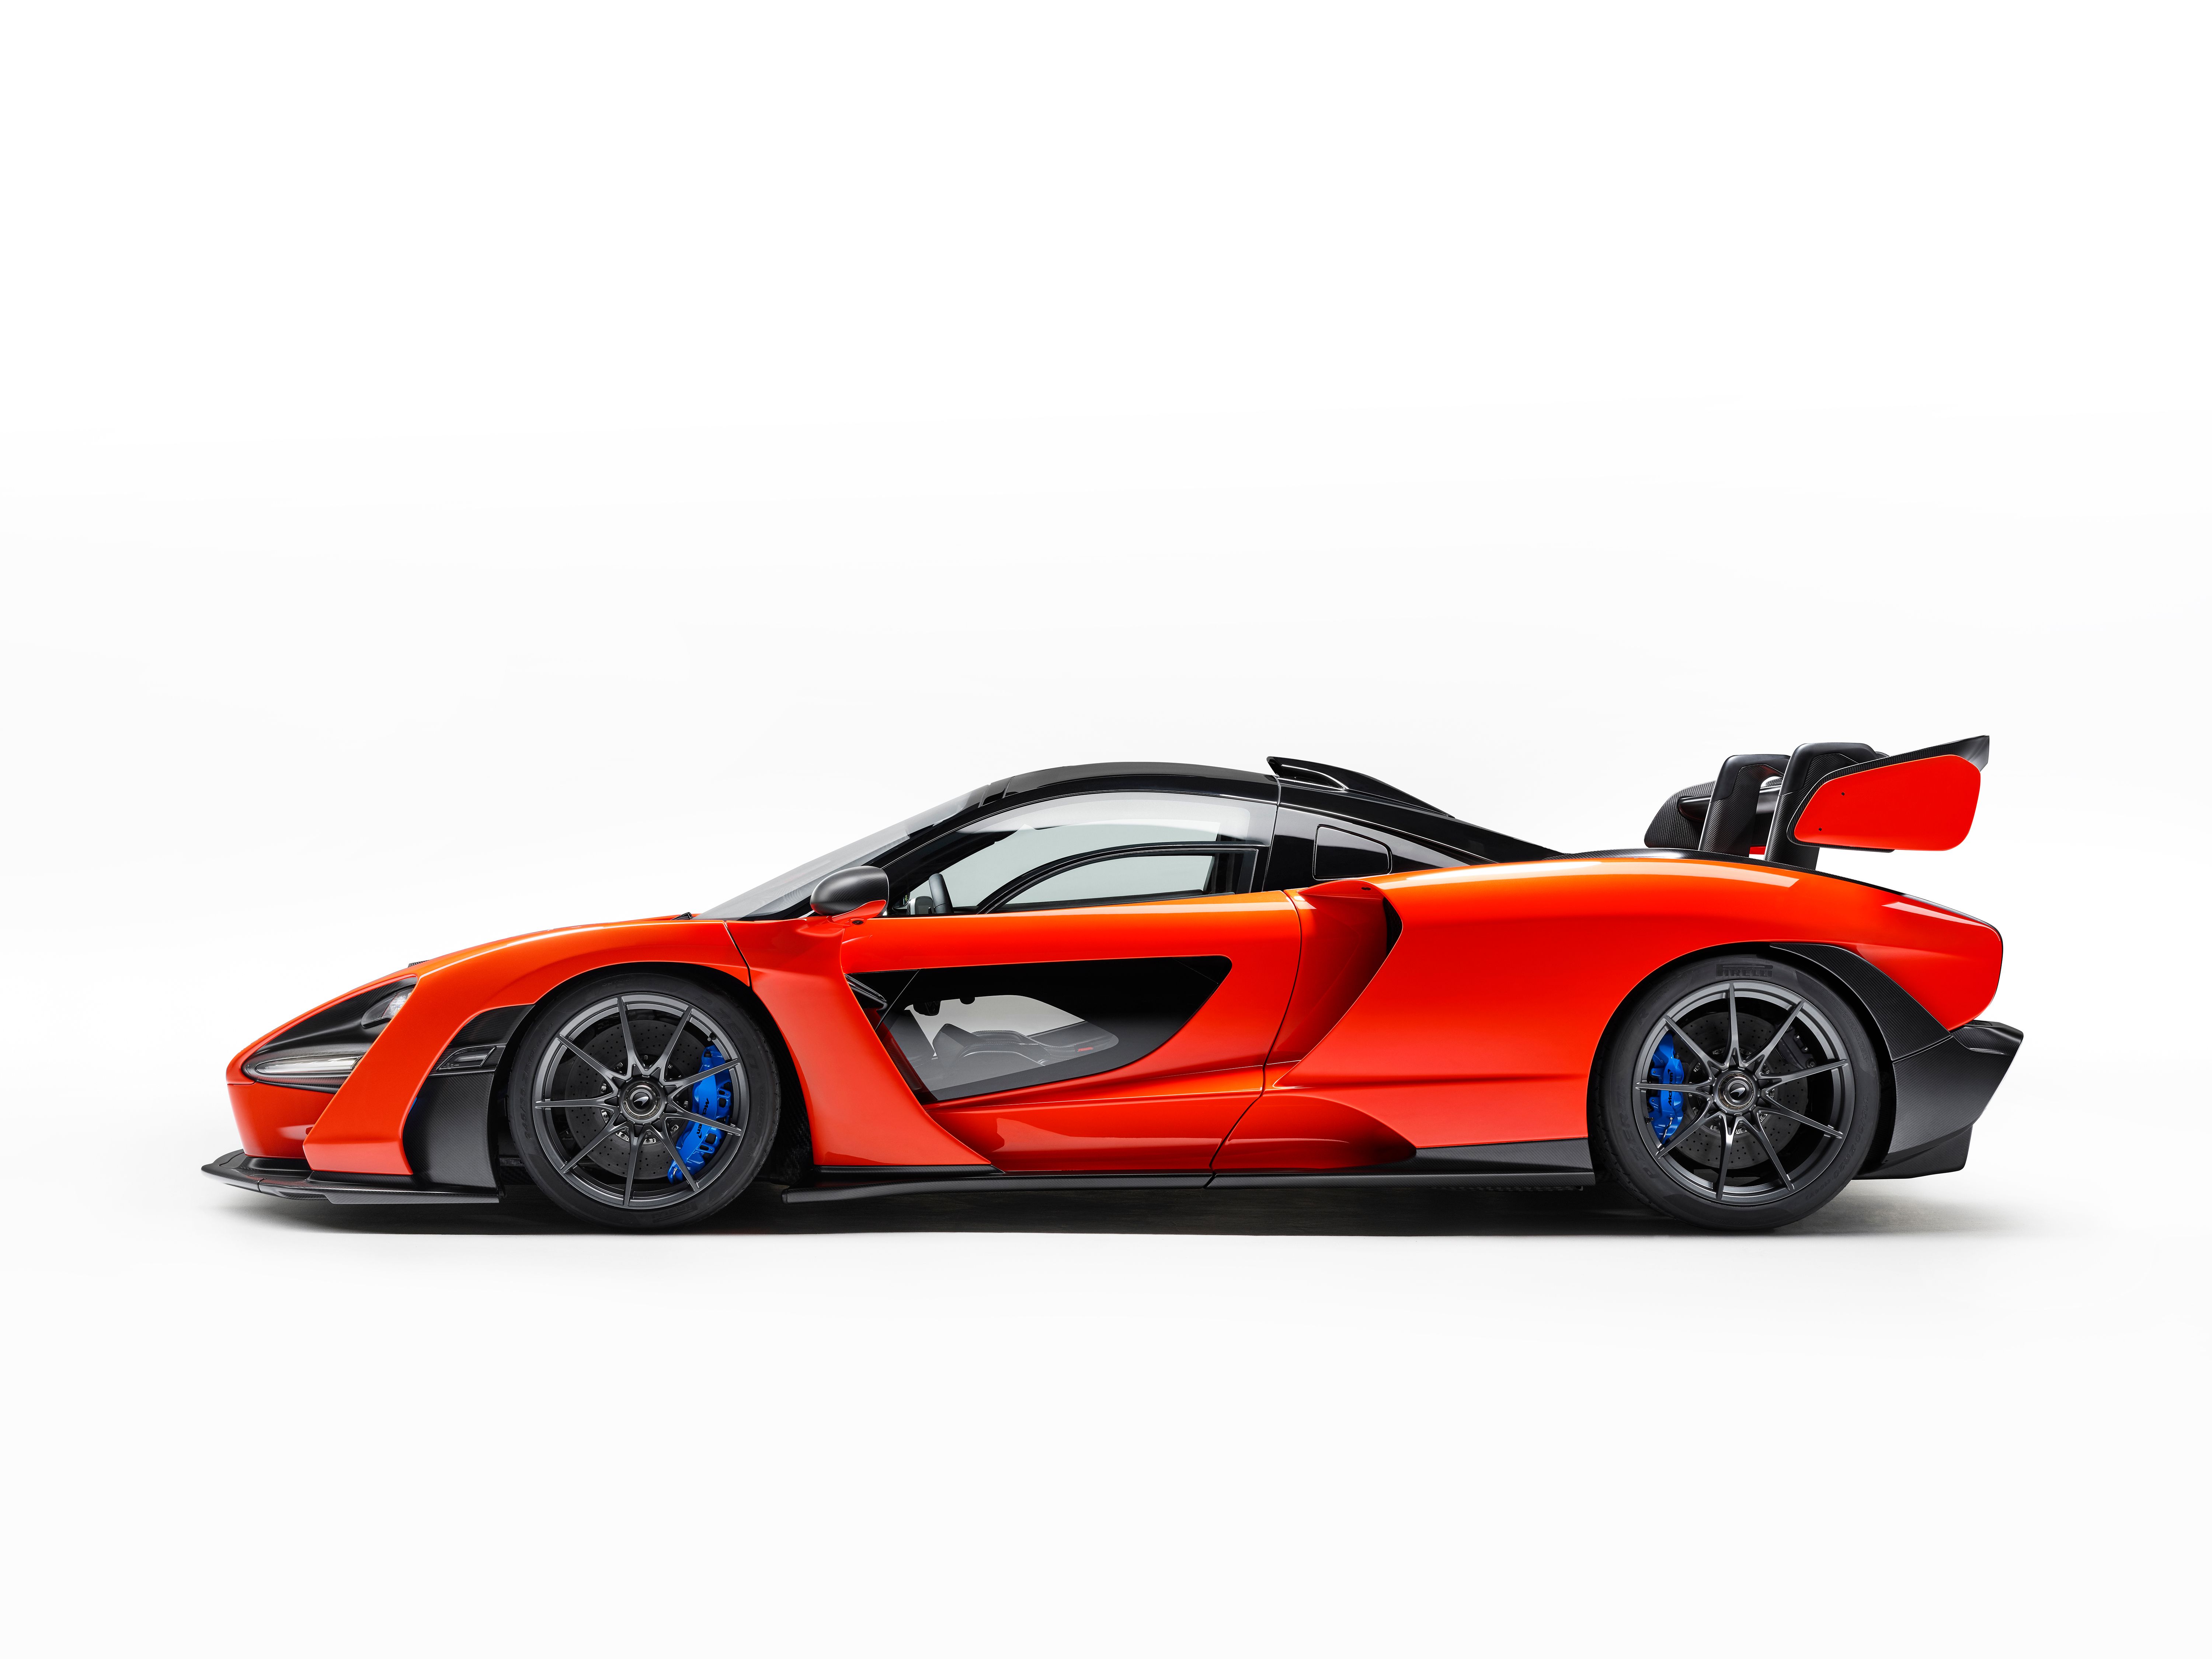 New facts, figures and a shade of grey revealed for McLaren Senna